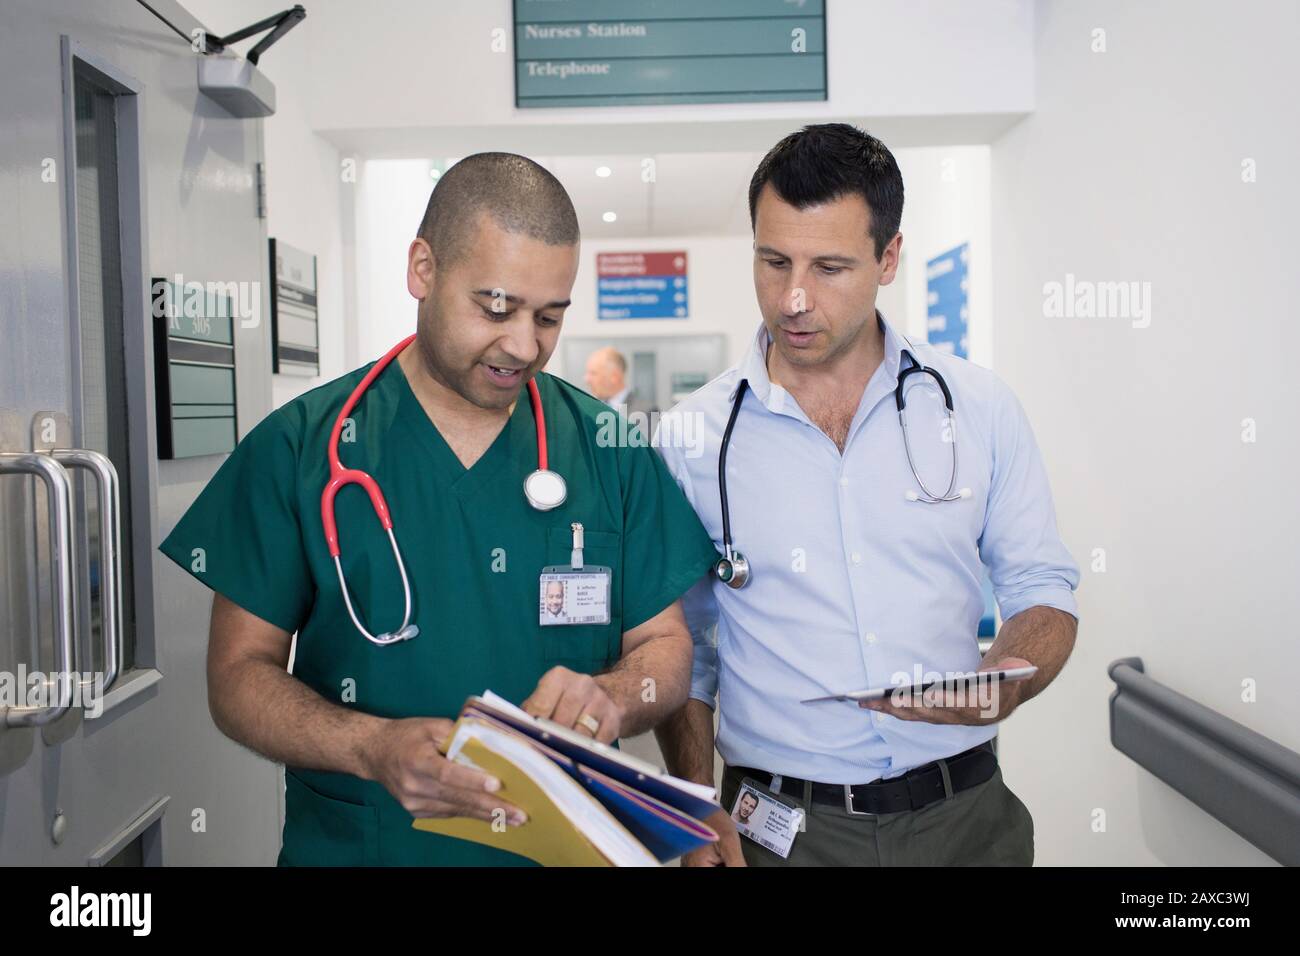 Male doctor and surgeon discussing medical chart, making rounds in hospital corridor Stock Photo